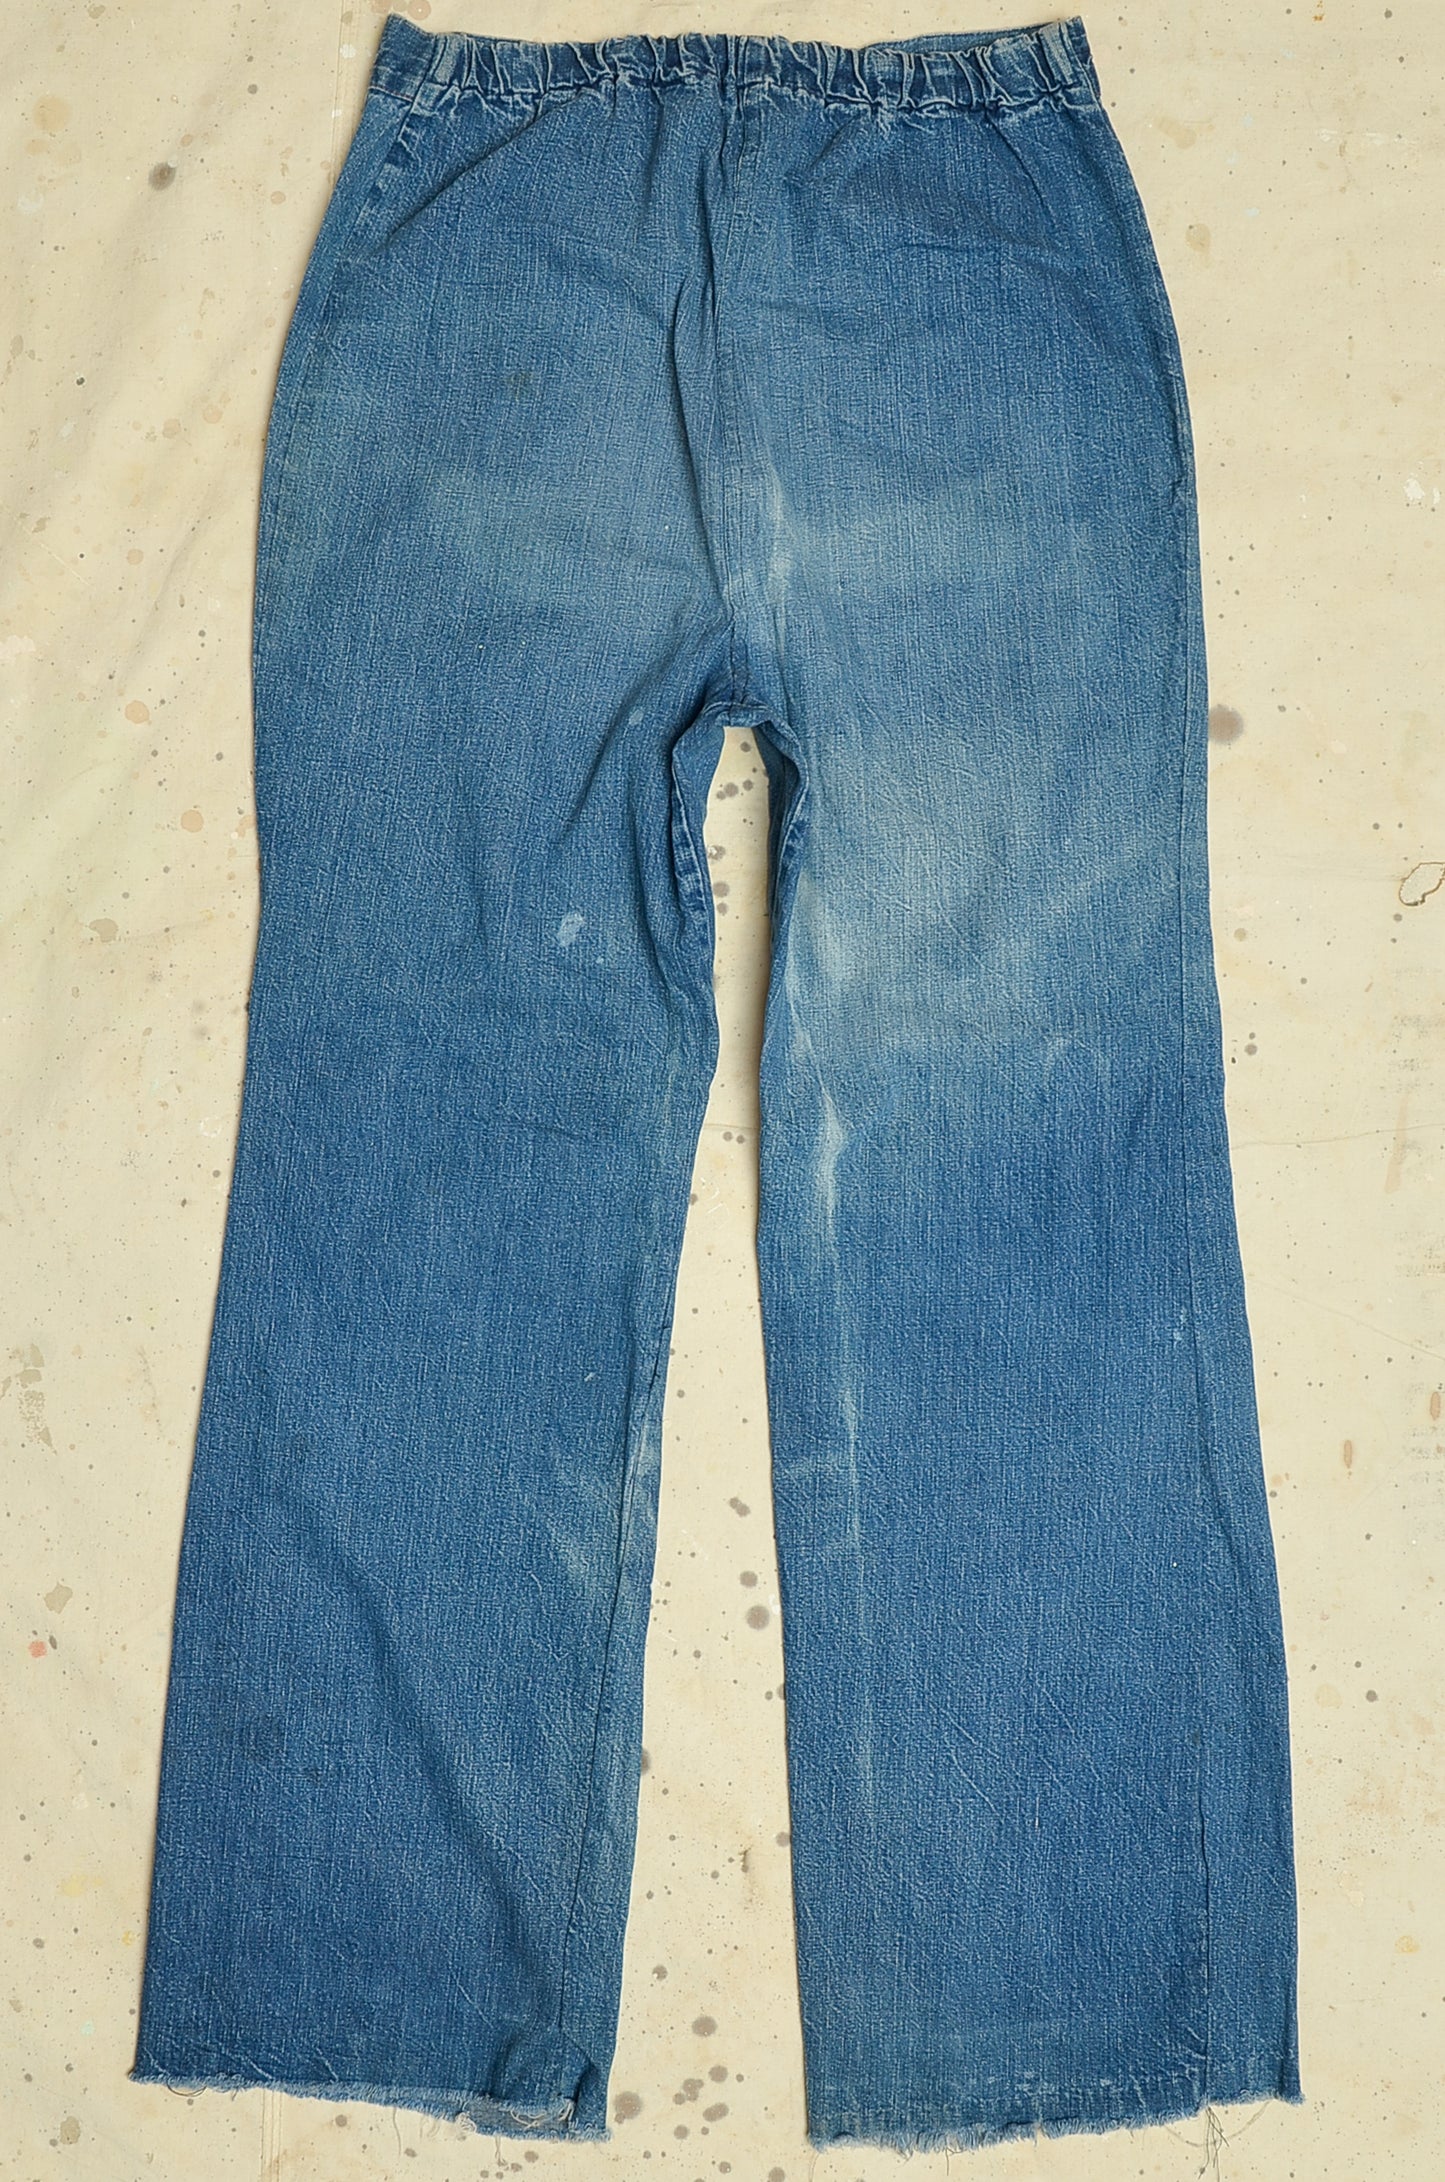 1960s Bell Bottoms Indigo Dungarees Style Hippie Jeans 32 x 31